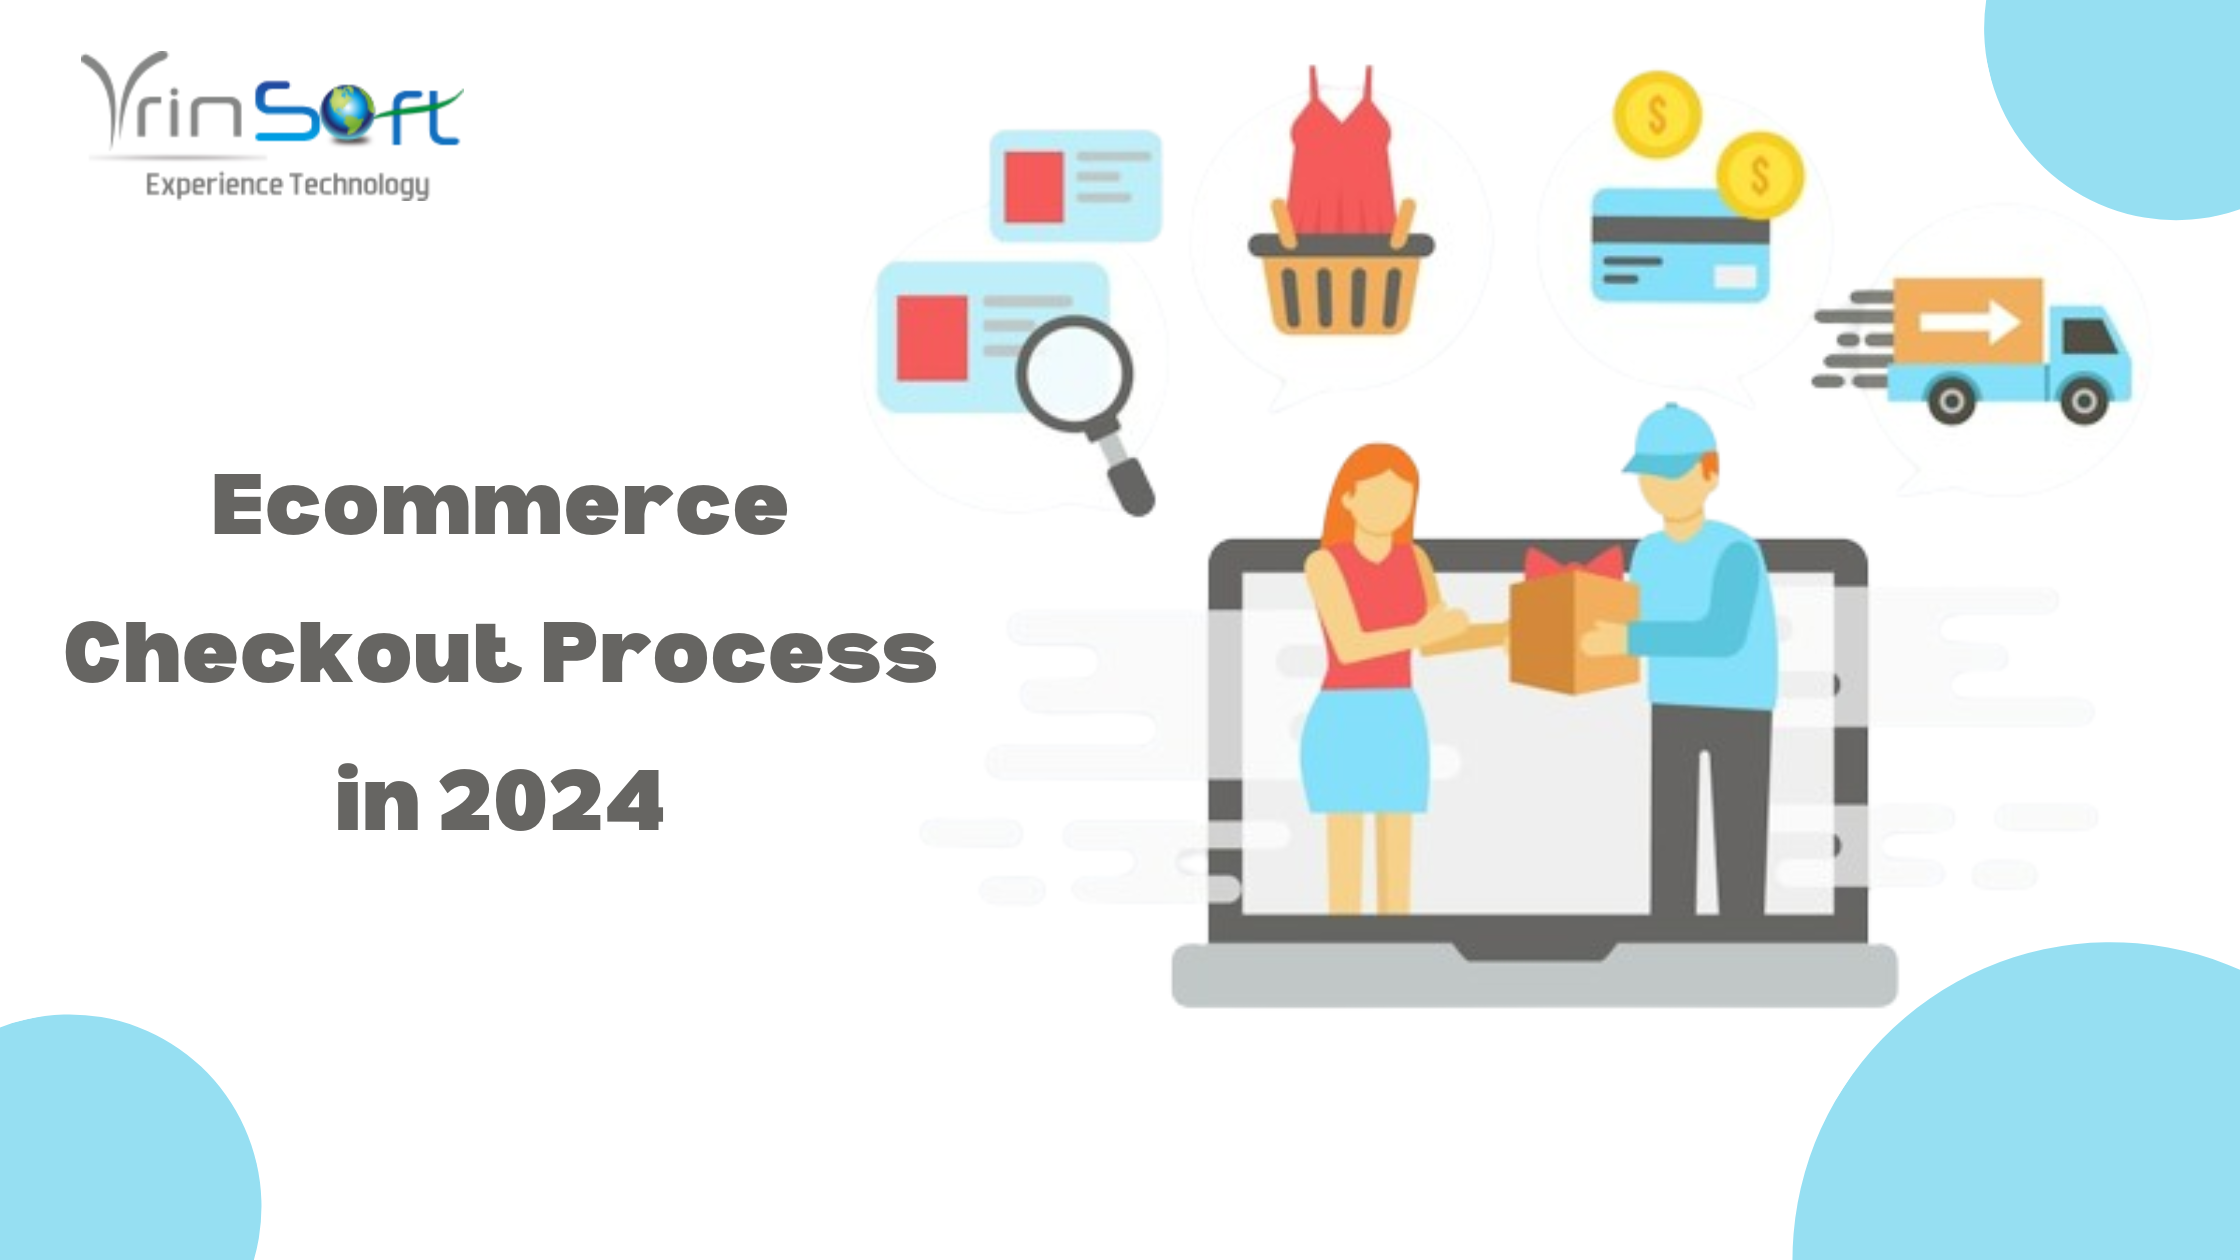 Ecommerce Checkout Process in 2024